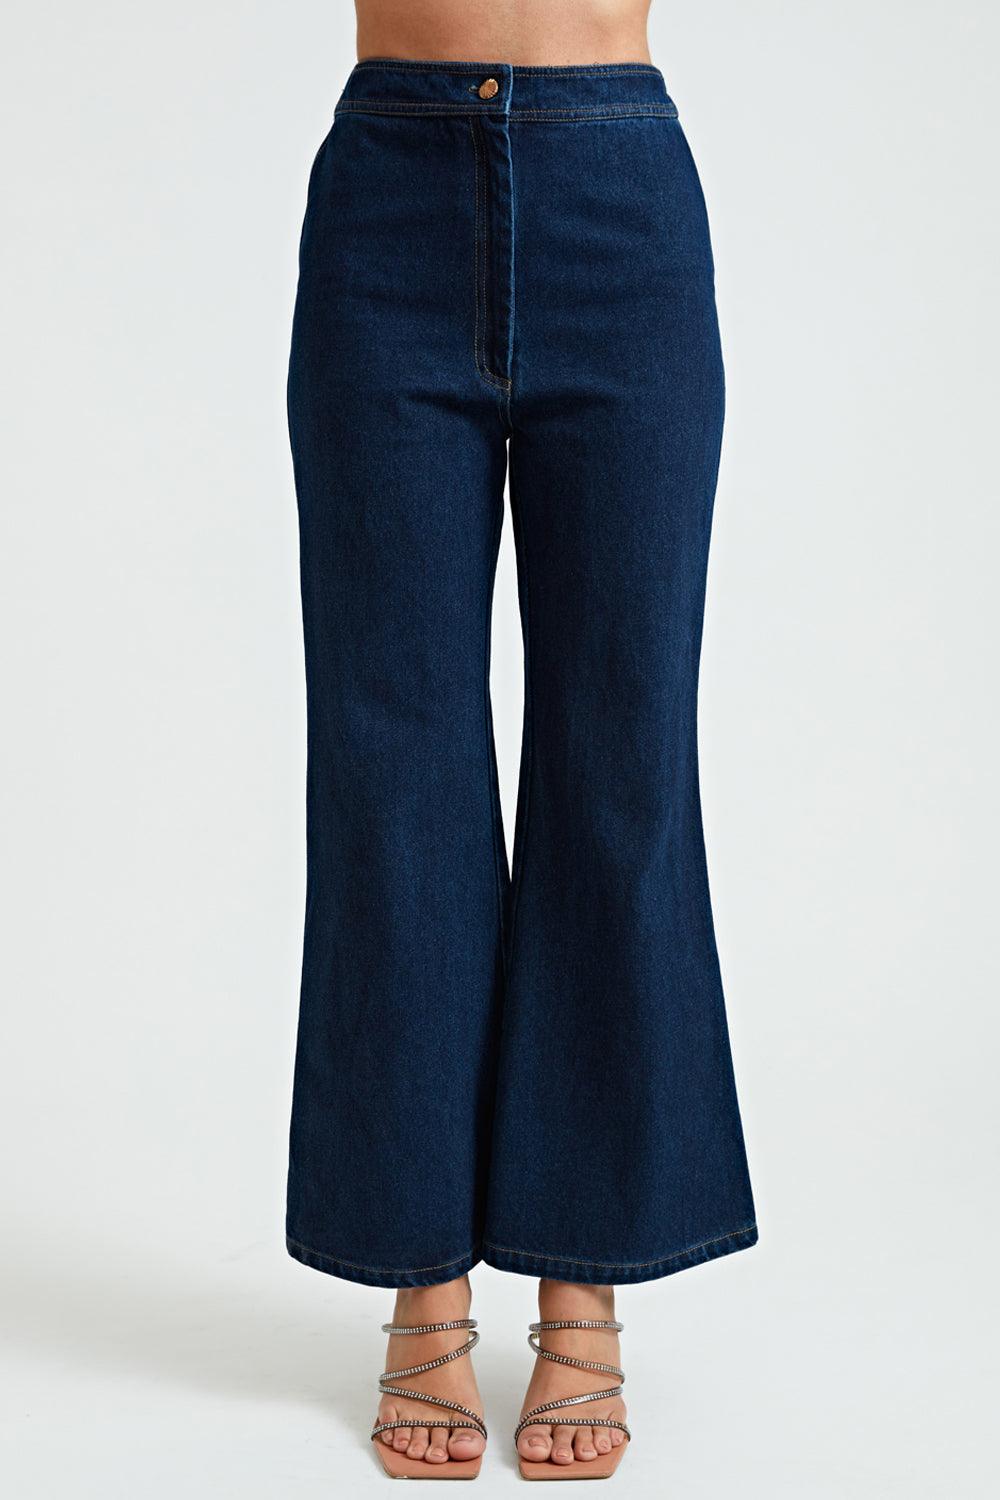 Poof Shacket Co-ord Trousers - ANI CLOTHING